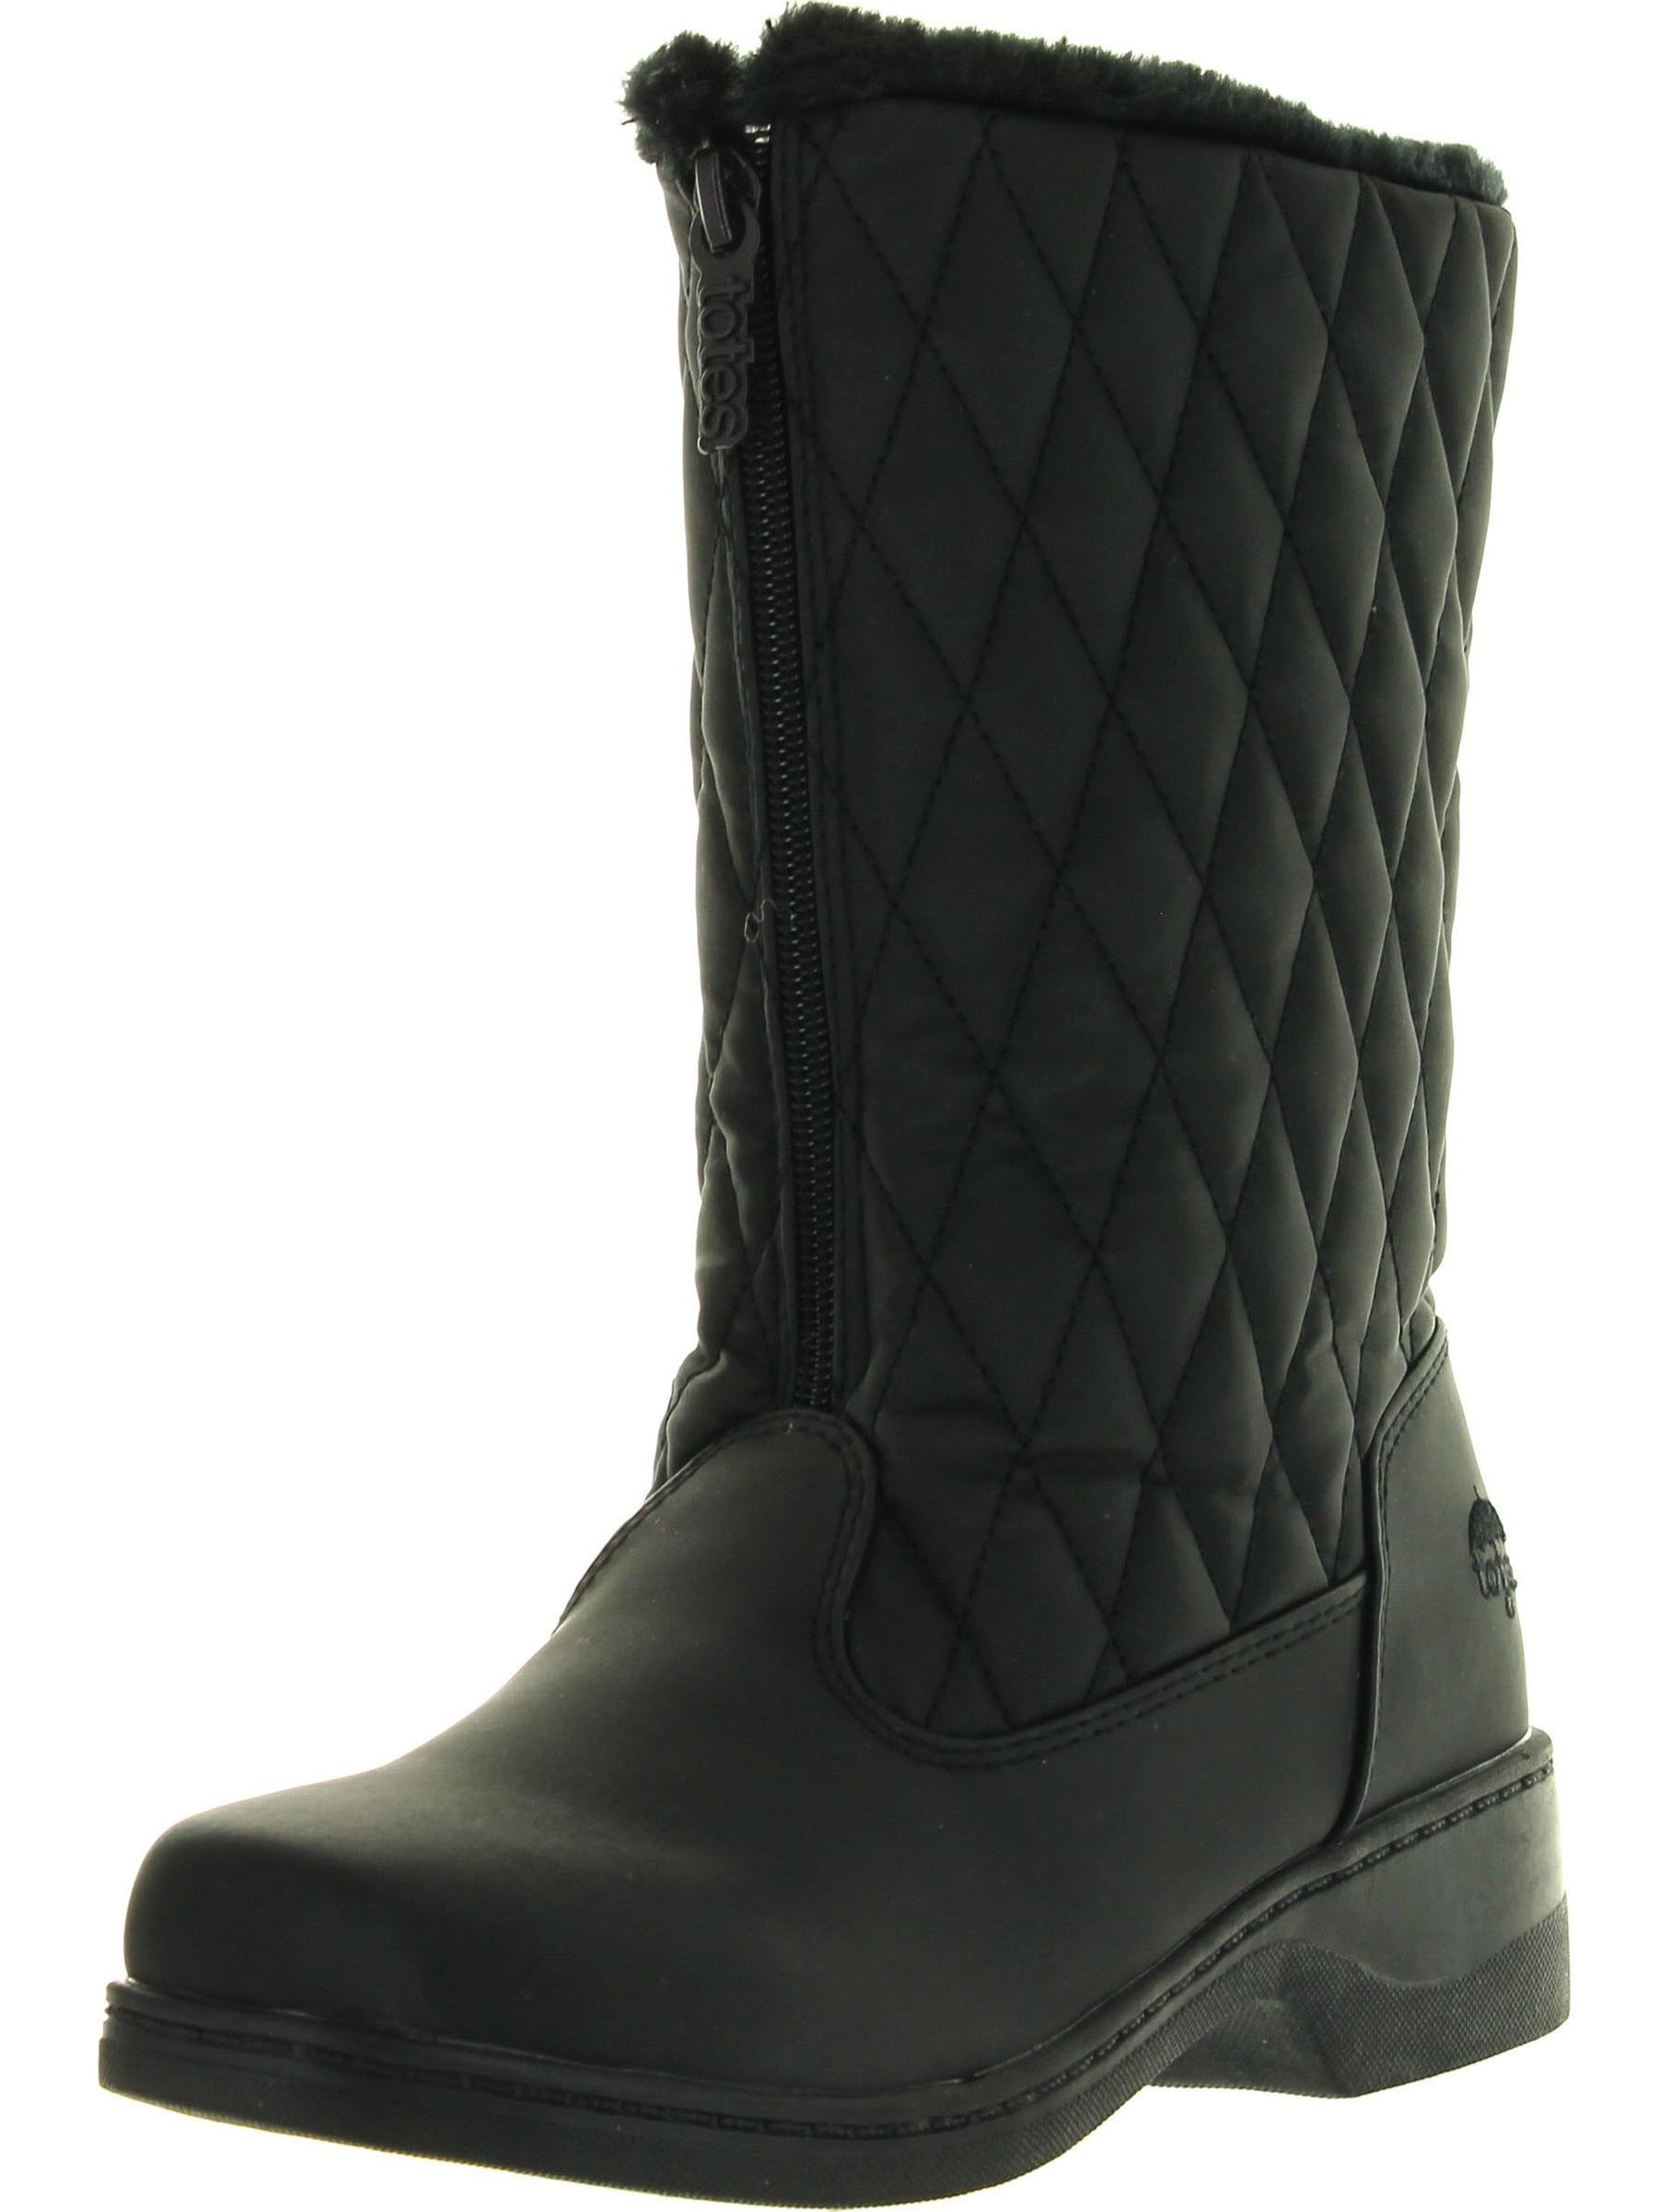 Totes Womens Quilty Fashion Waterproof Snow Boots Walmart